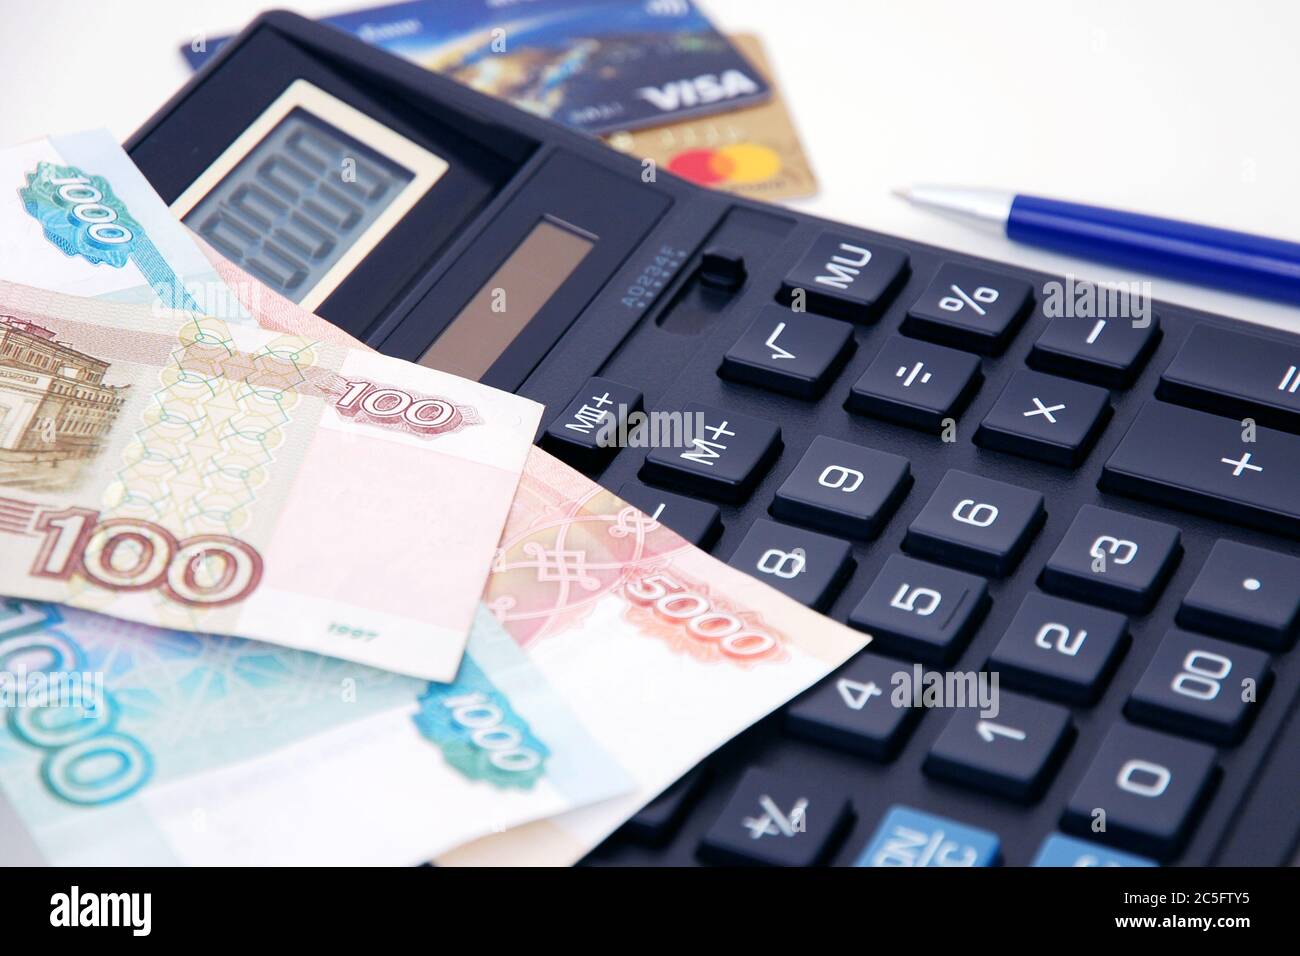 Ruble banknotes, calculator, pen and blurred credit cards close-up. Save money concept Stock Photo